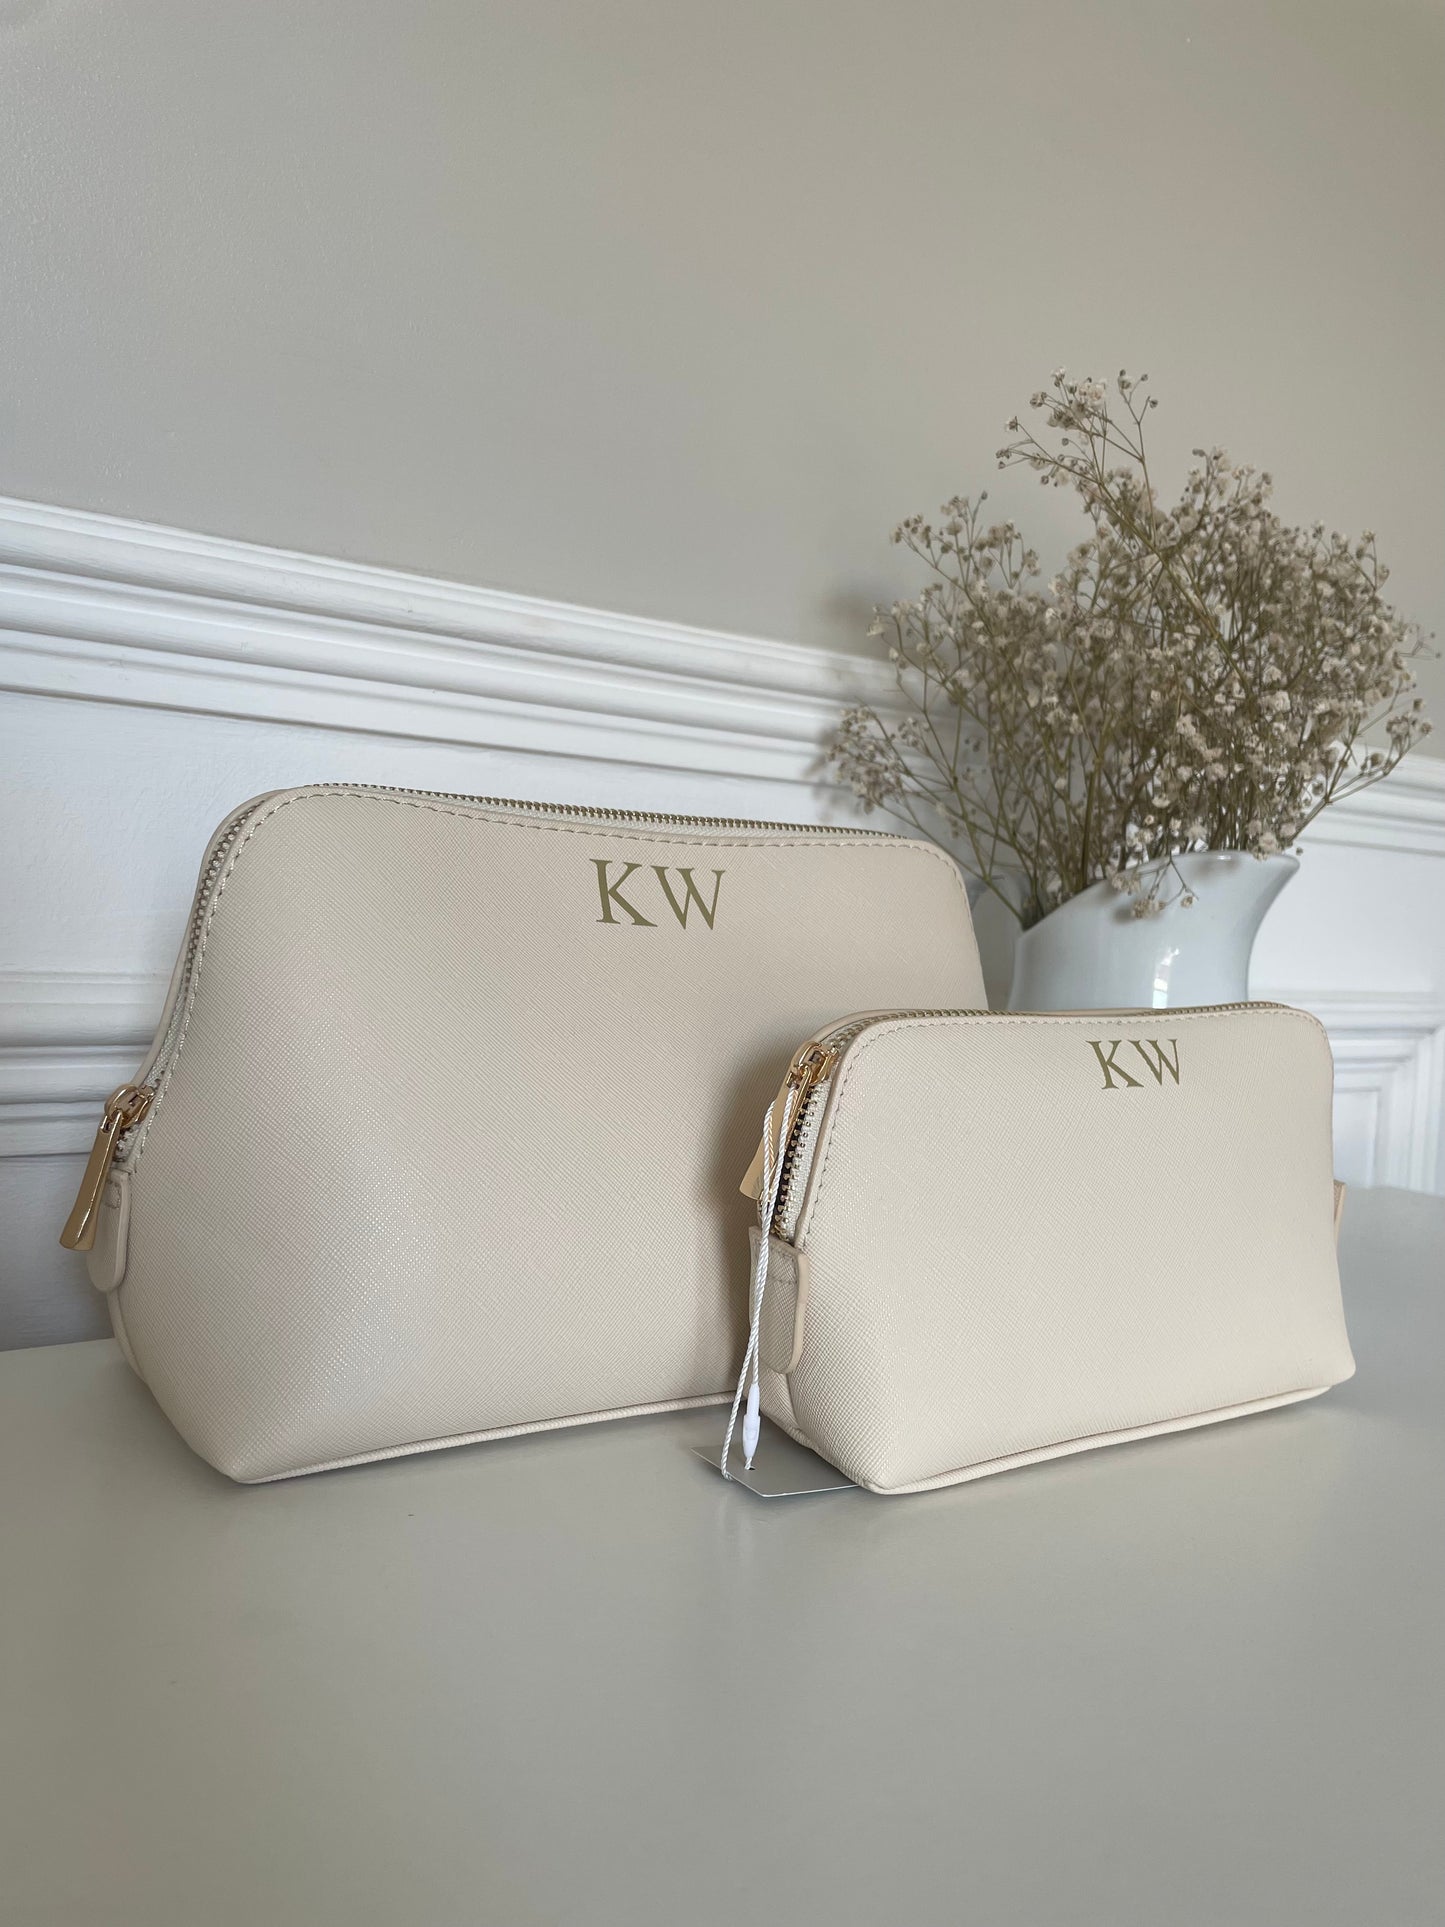 Personalised Luxury Initial Accessory / Make Up Bag